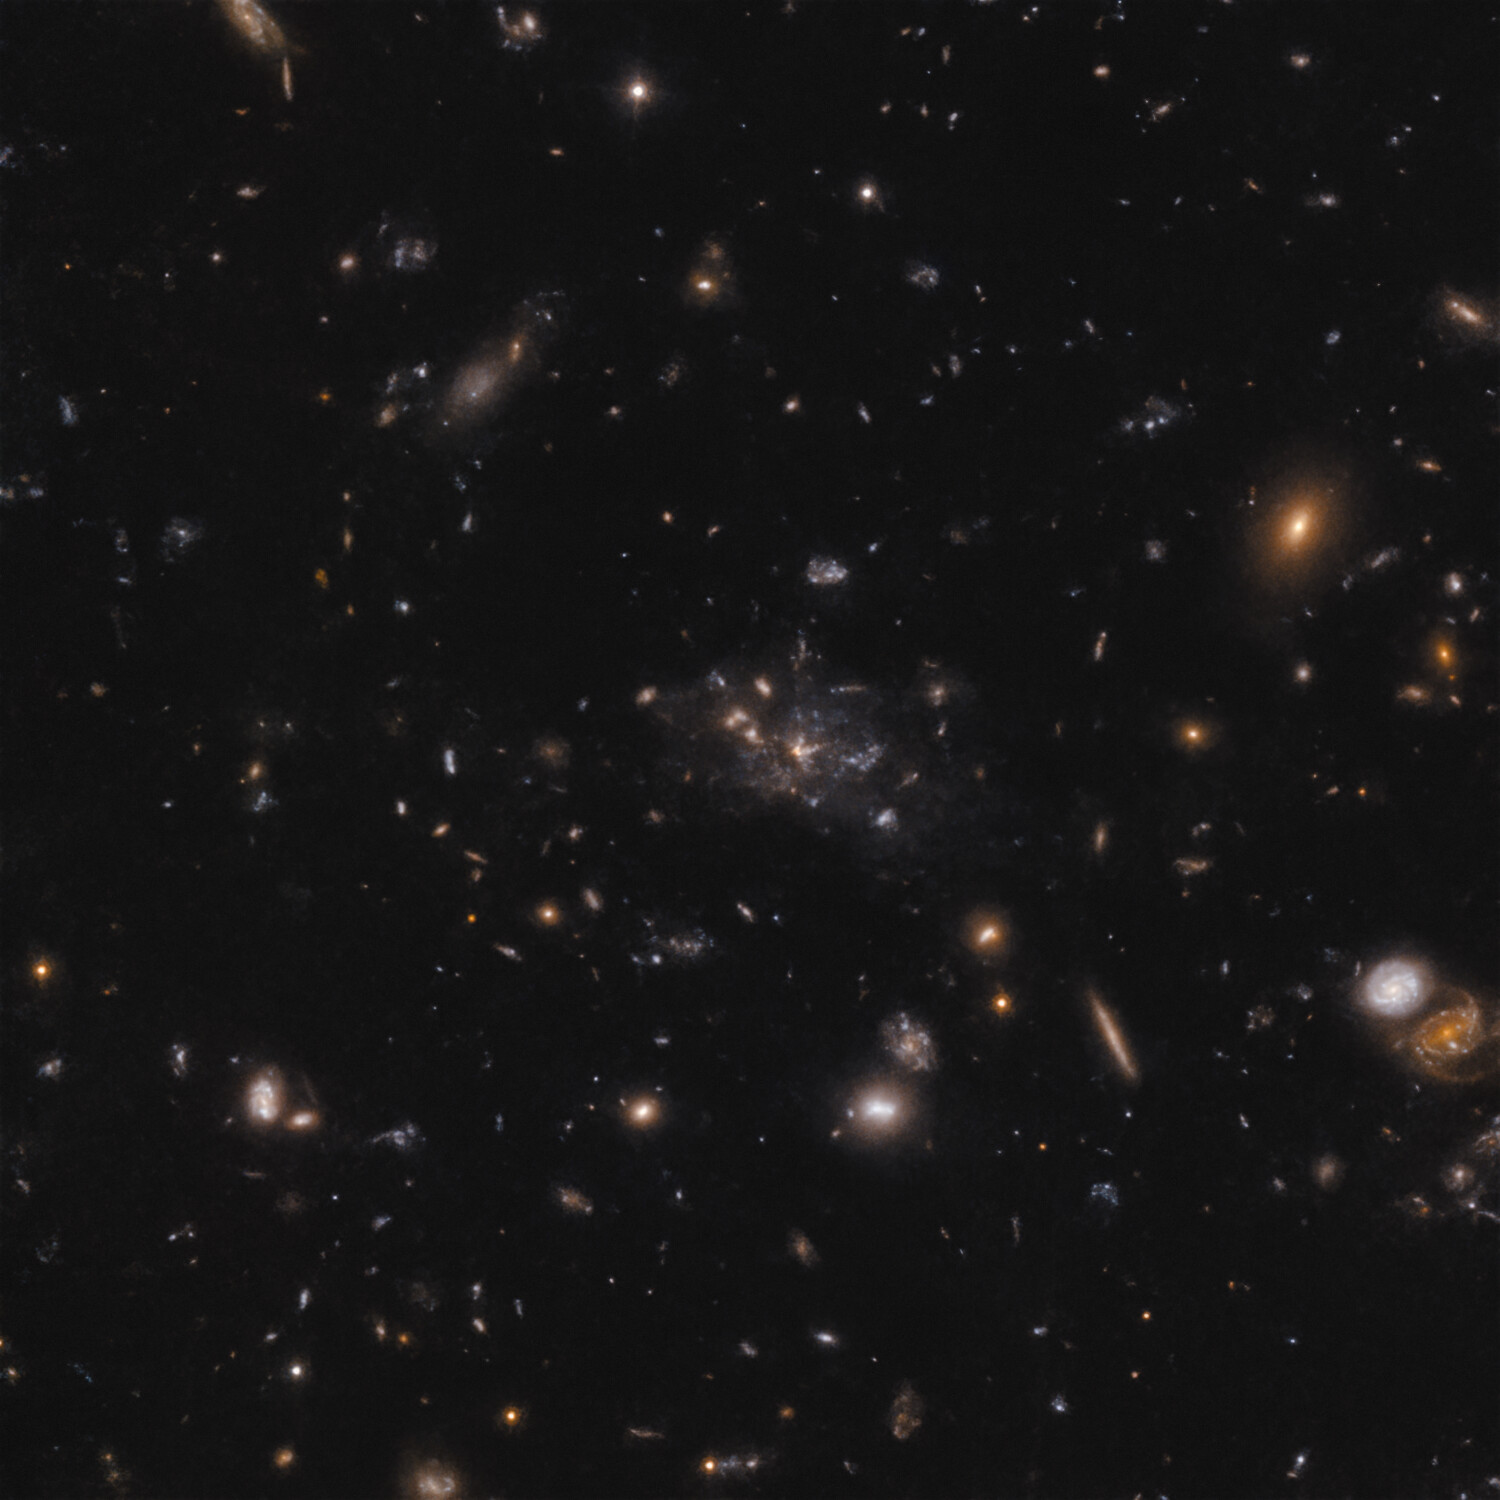 This image shows the protocluster around the Spiderweb galaxy (formally known as MRC 1138-262). The light that we see in the image shows galaxies at a time when the Universe was only 3 billion years old. Most of the mass in the protocluster does not reside in the galaxies, but in the gas known as the intracluster medium. Because of the mass in the gas, the protocluster is in the process of becoming a massive cluster held together by its own gravity. Credit: ESO/H. Ford